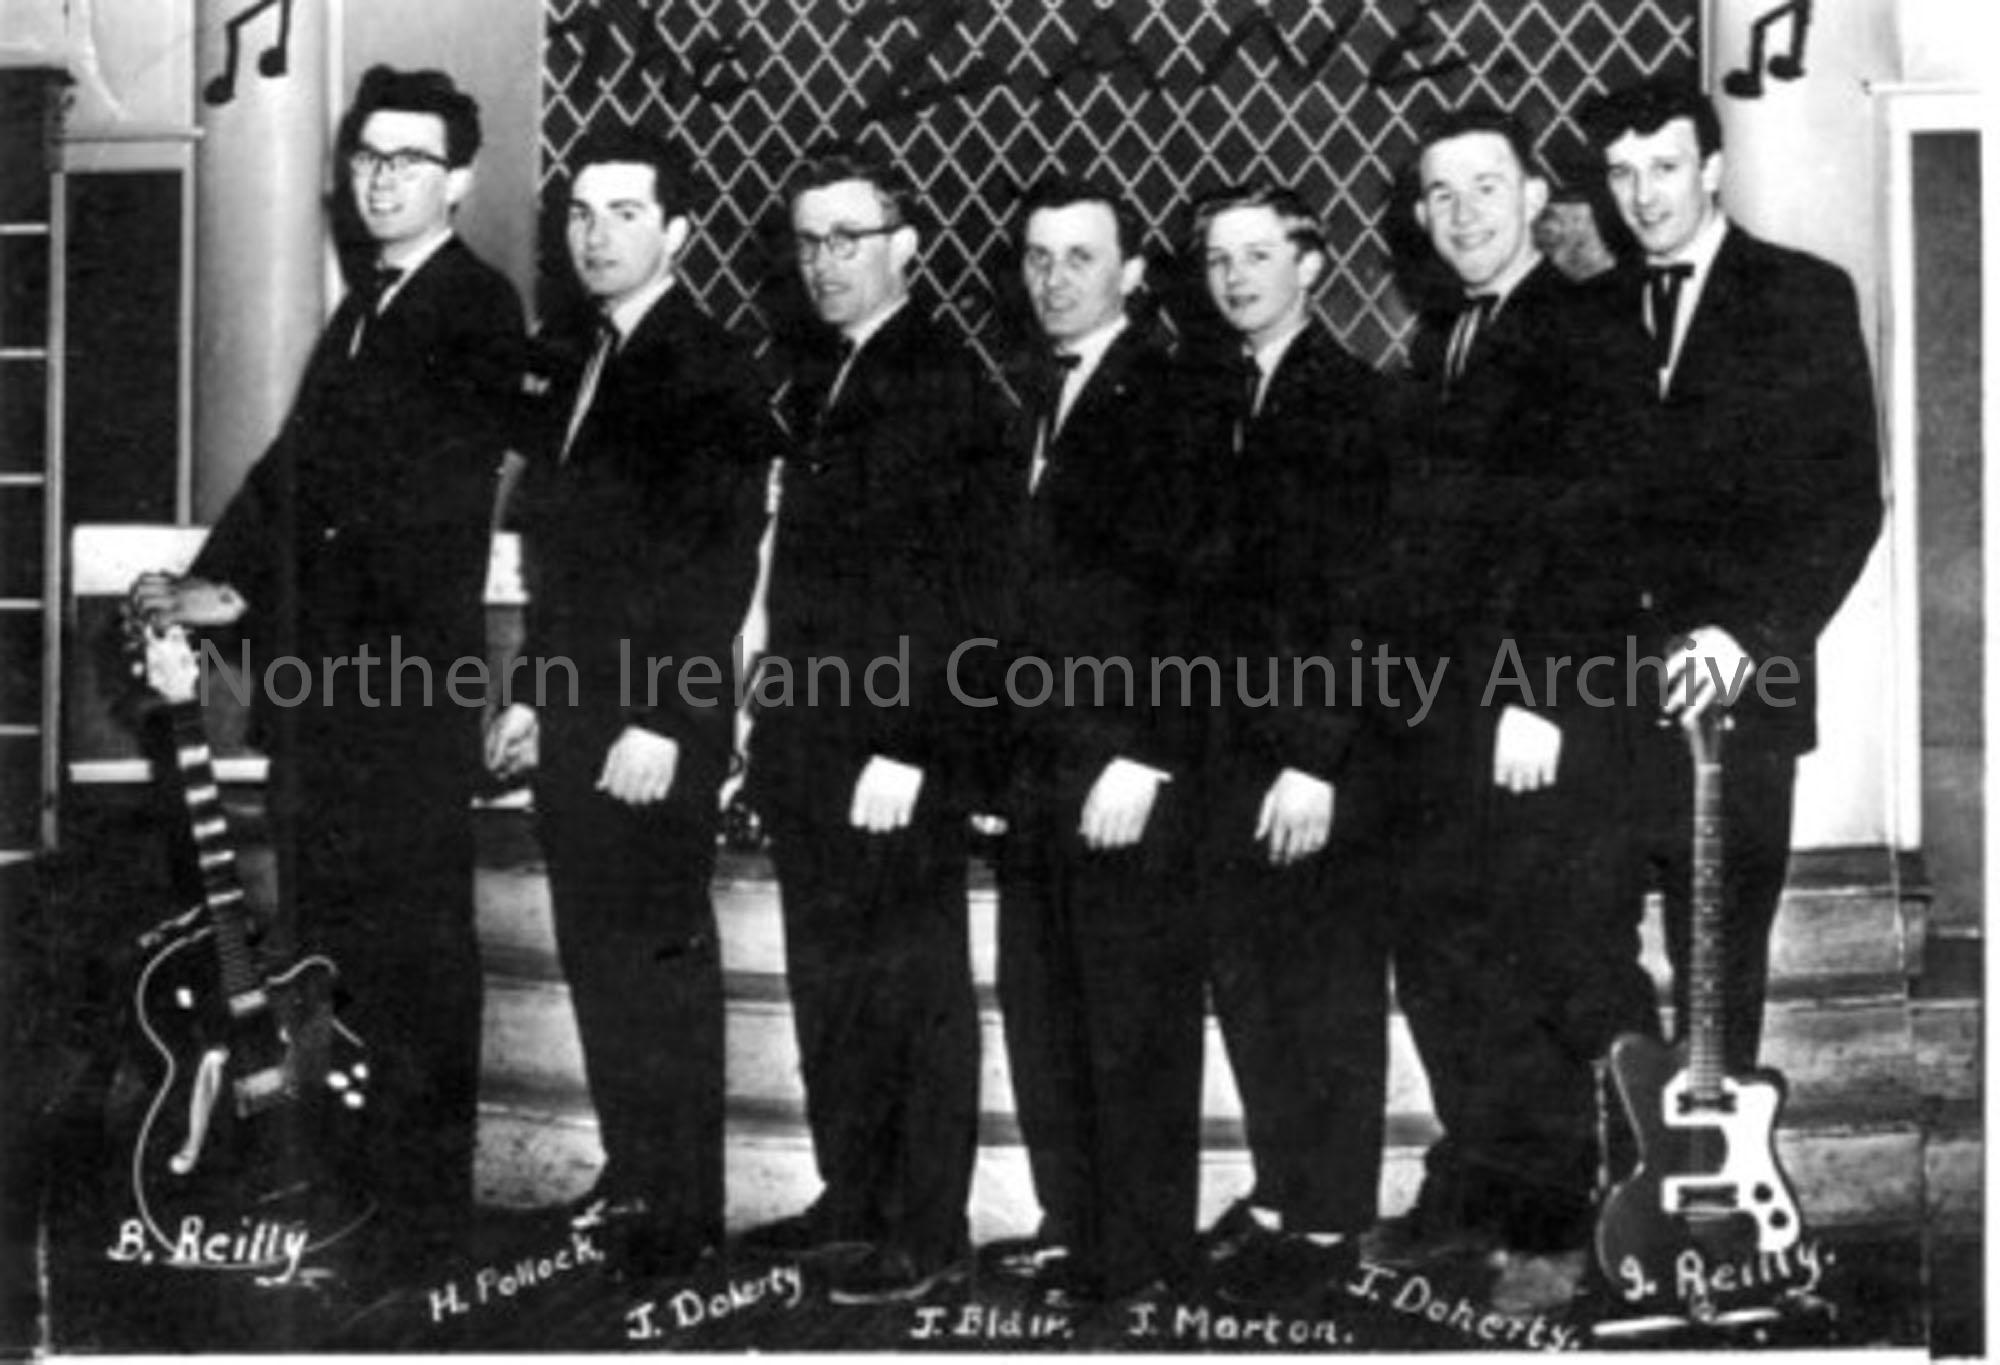 Black and white photograph of ‘The Zane Band’ c. 1960’s. Names are printed underneath each person; B Reilly, H Pollock, J Blair, j Marton, j.Reilly